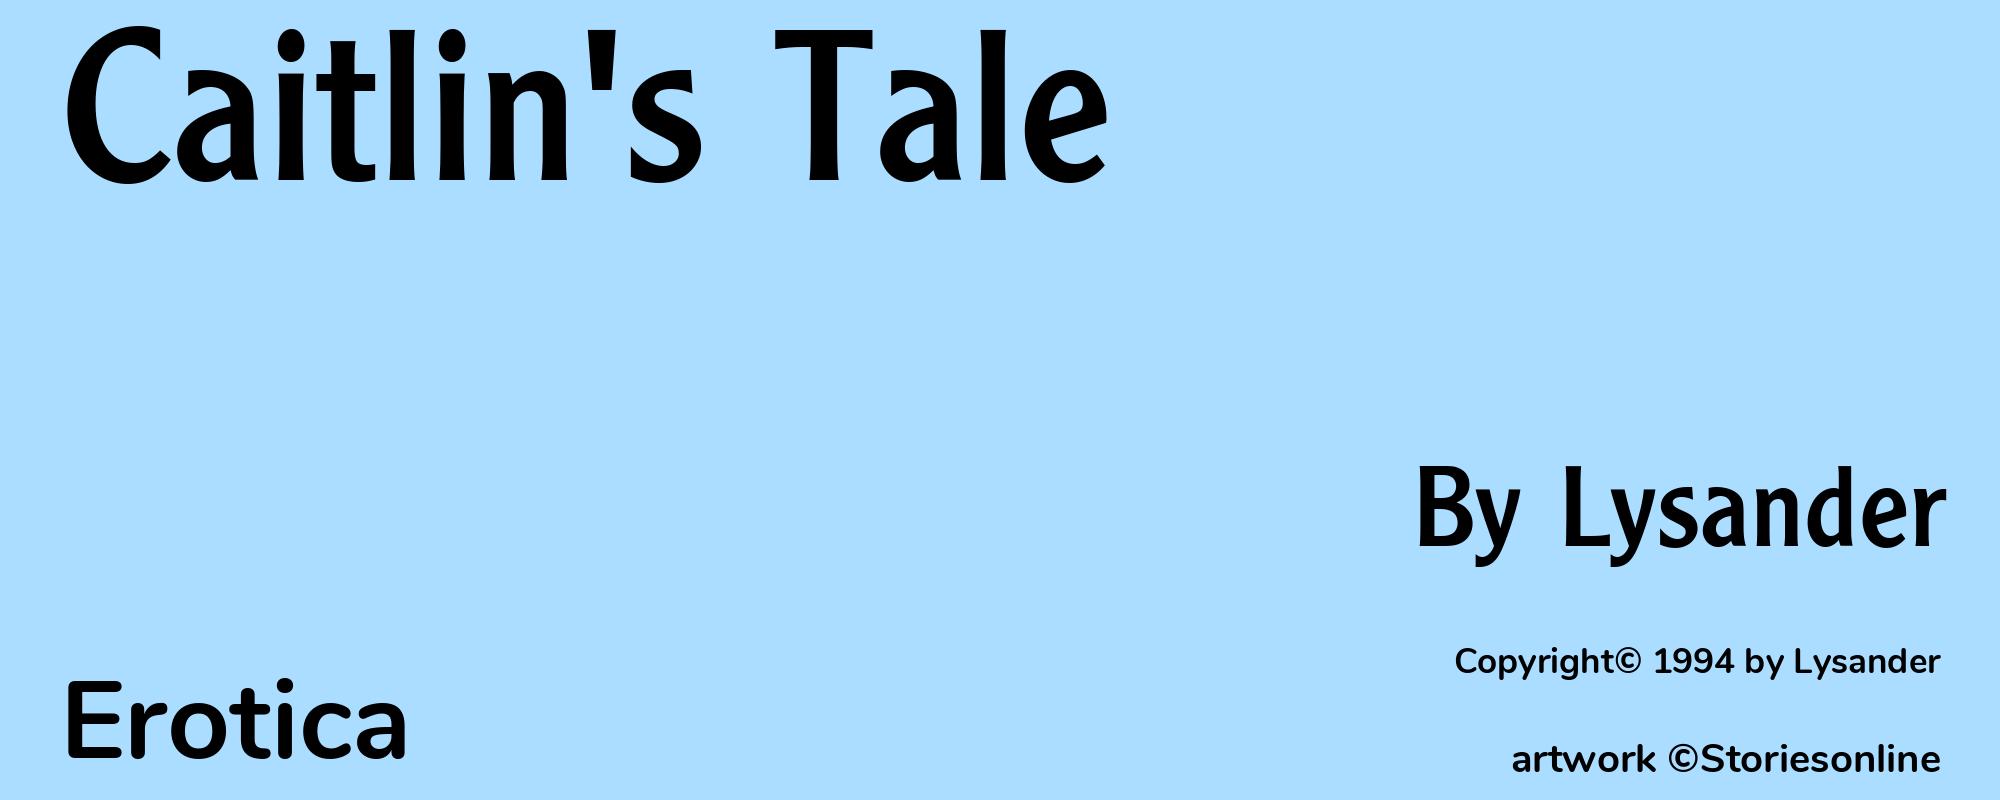 Caitlin's Tale - Cover